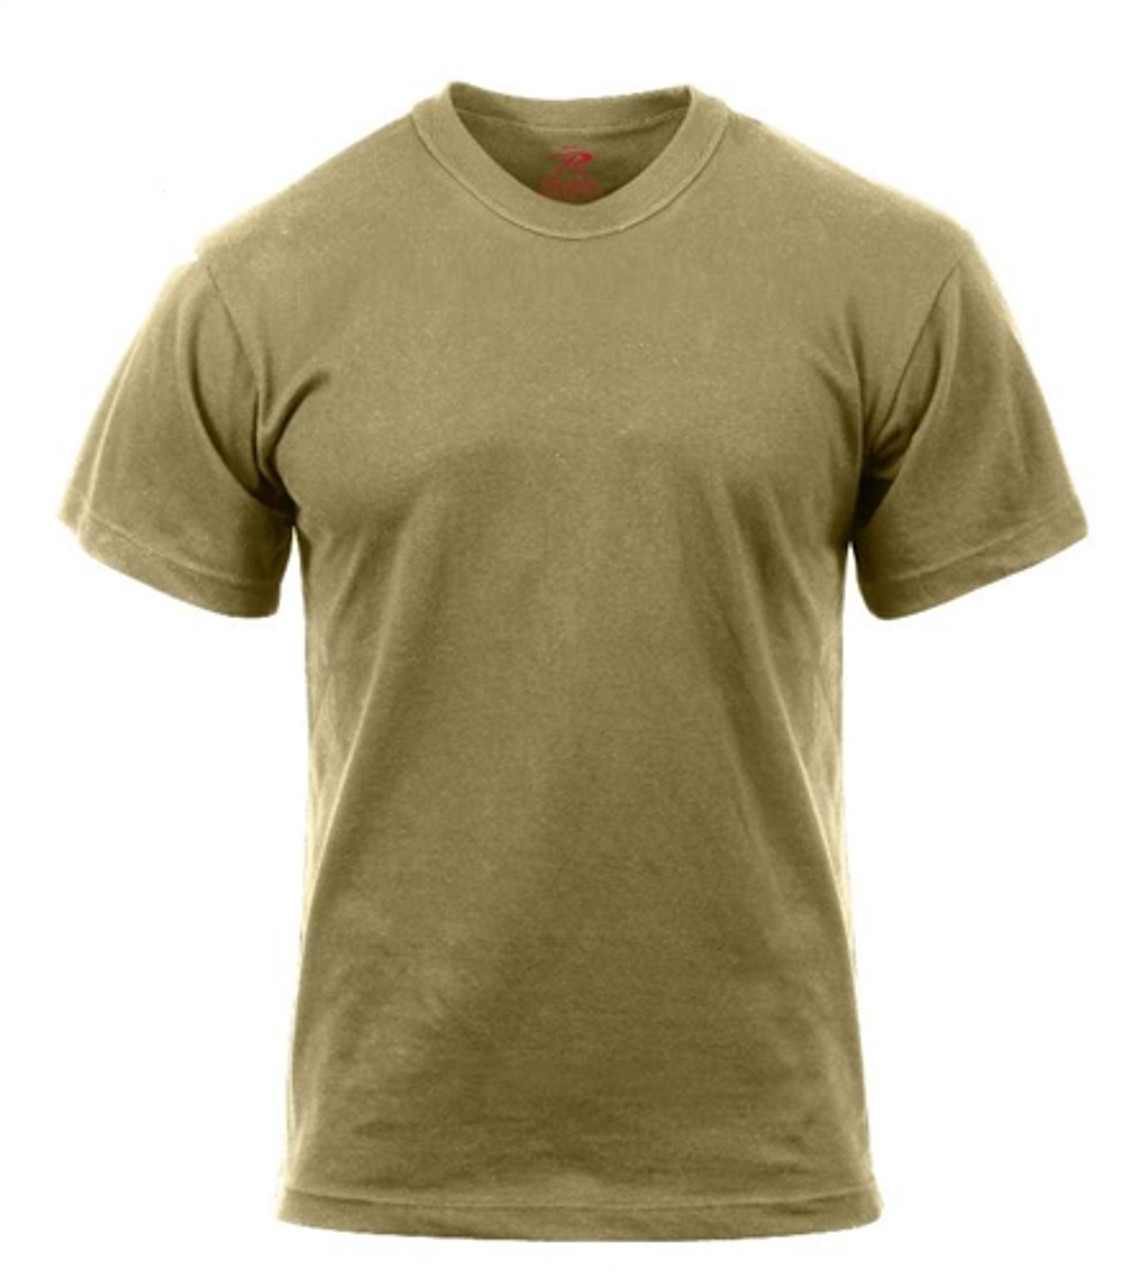 COYOTE BROWN AR 670-1 Compliant T-SHIRT from Hessen Tactical